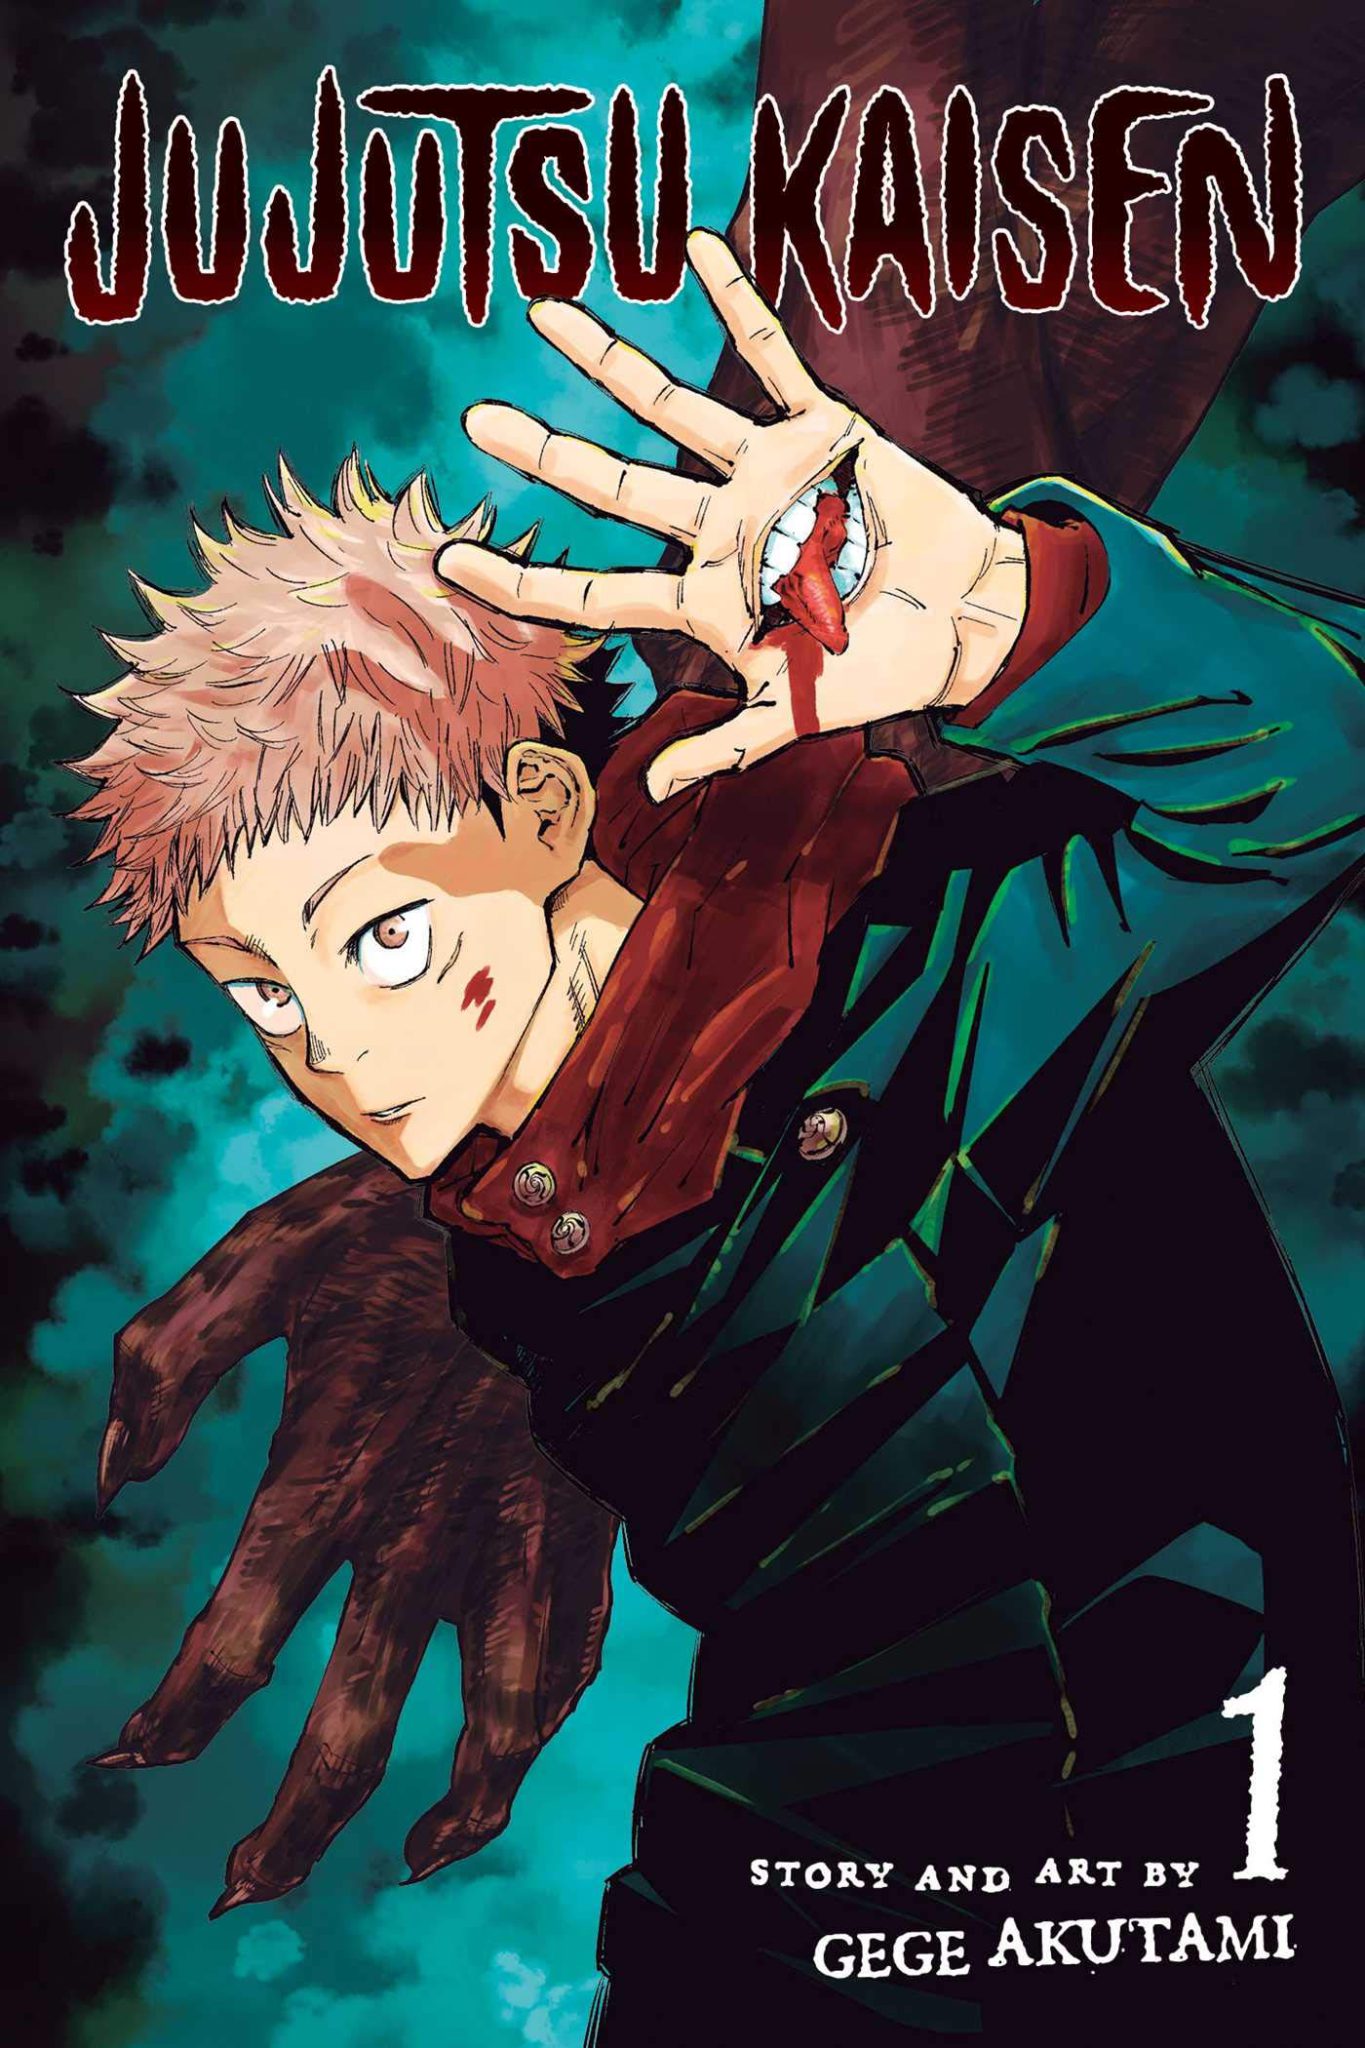 Jujutsu Kaisen Episode 15 Release Date, Story and More Updates The